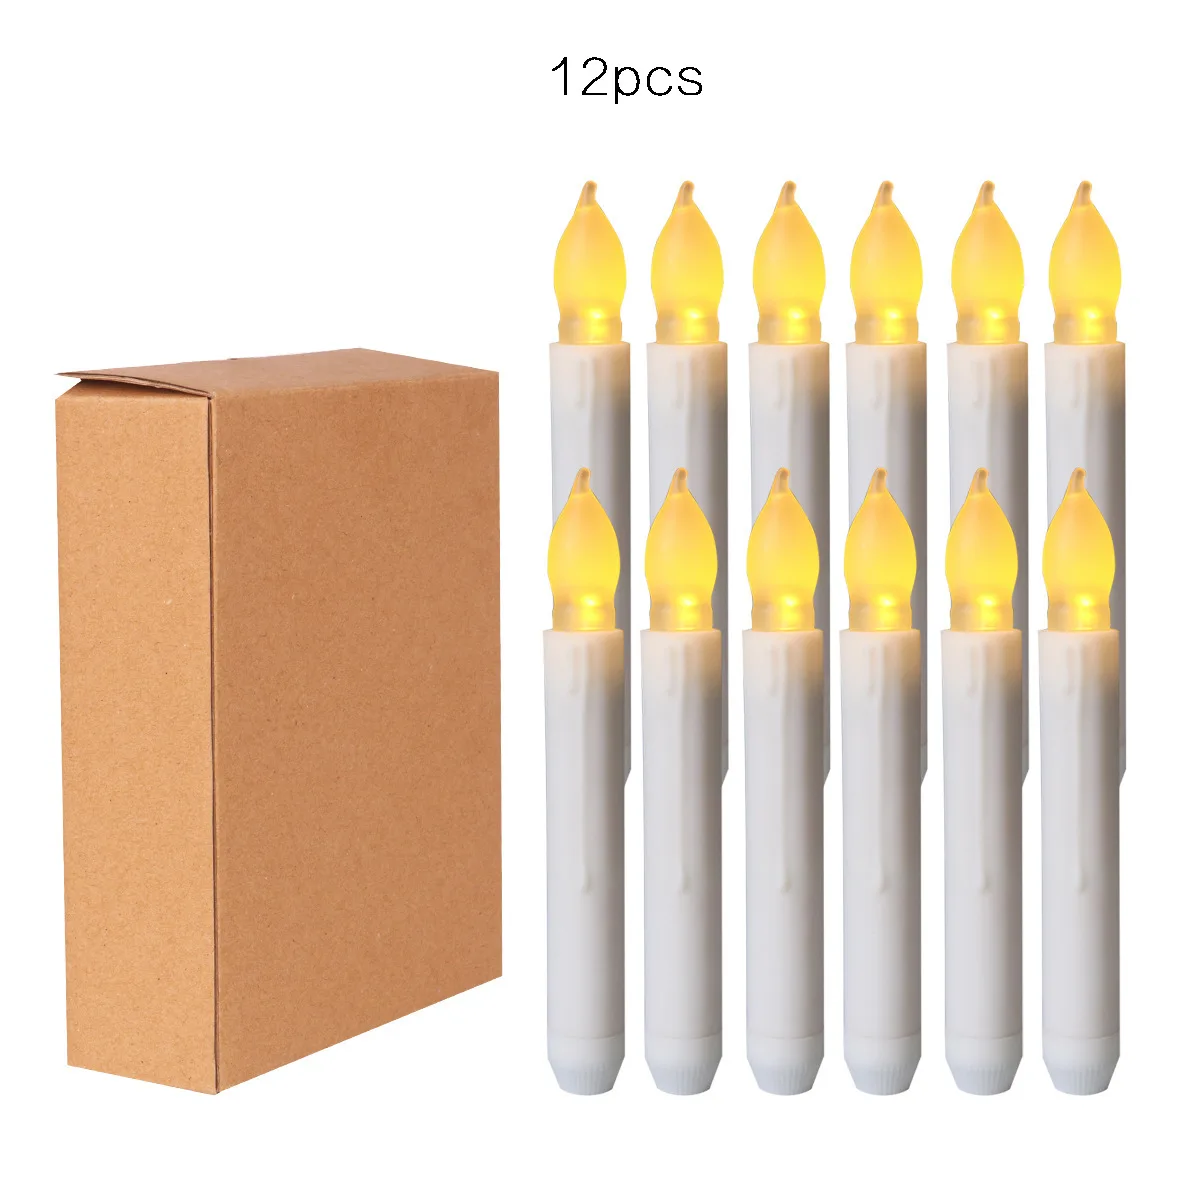 China factory wholesale different party/event led candles/led wax candles,led flameless candles lights